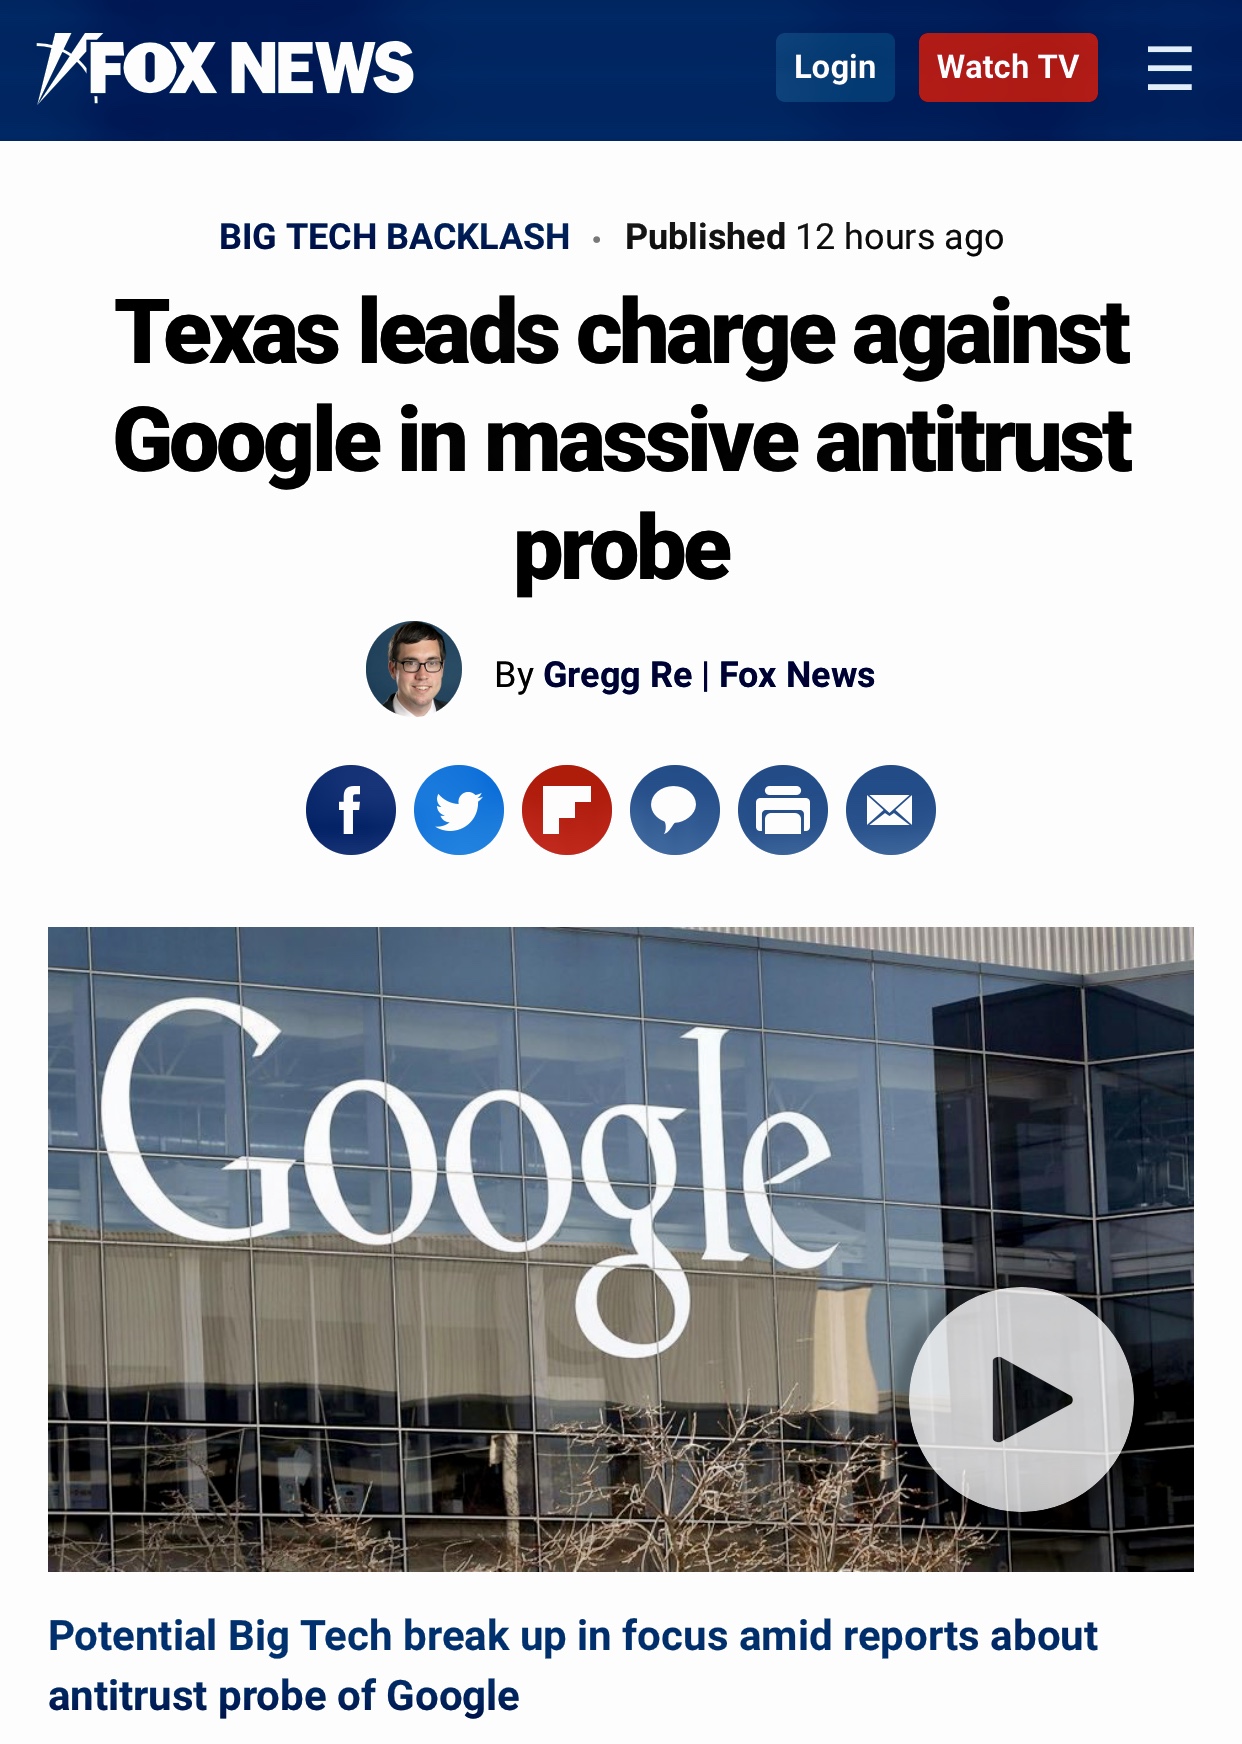 Texas leads charge against Google in massive antitrust probe